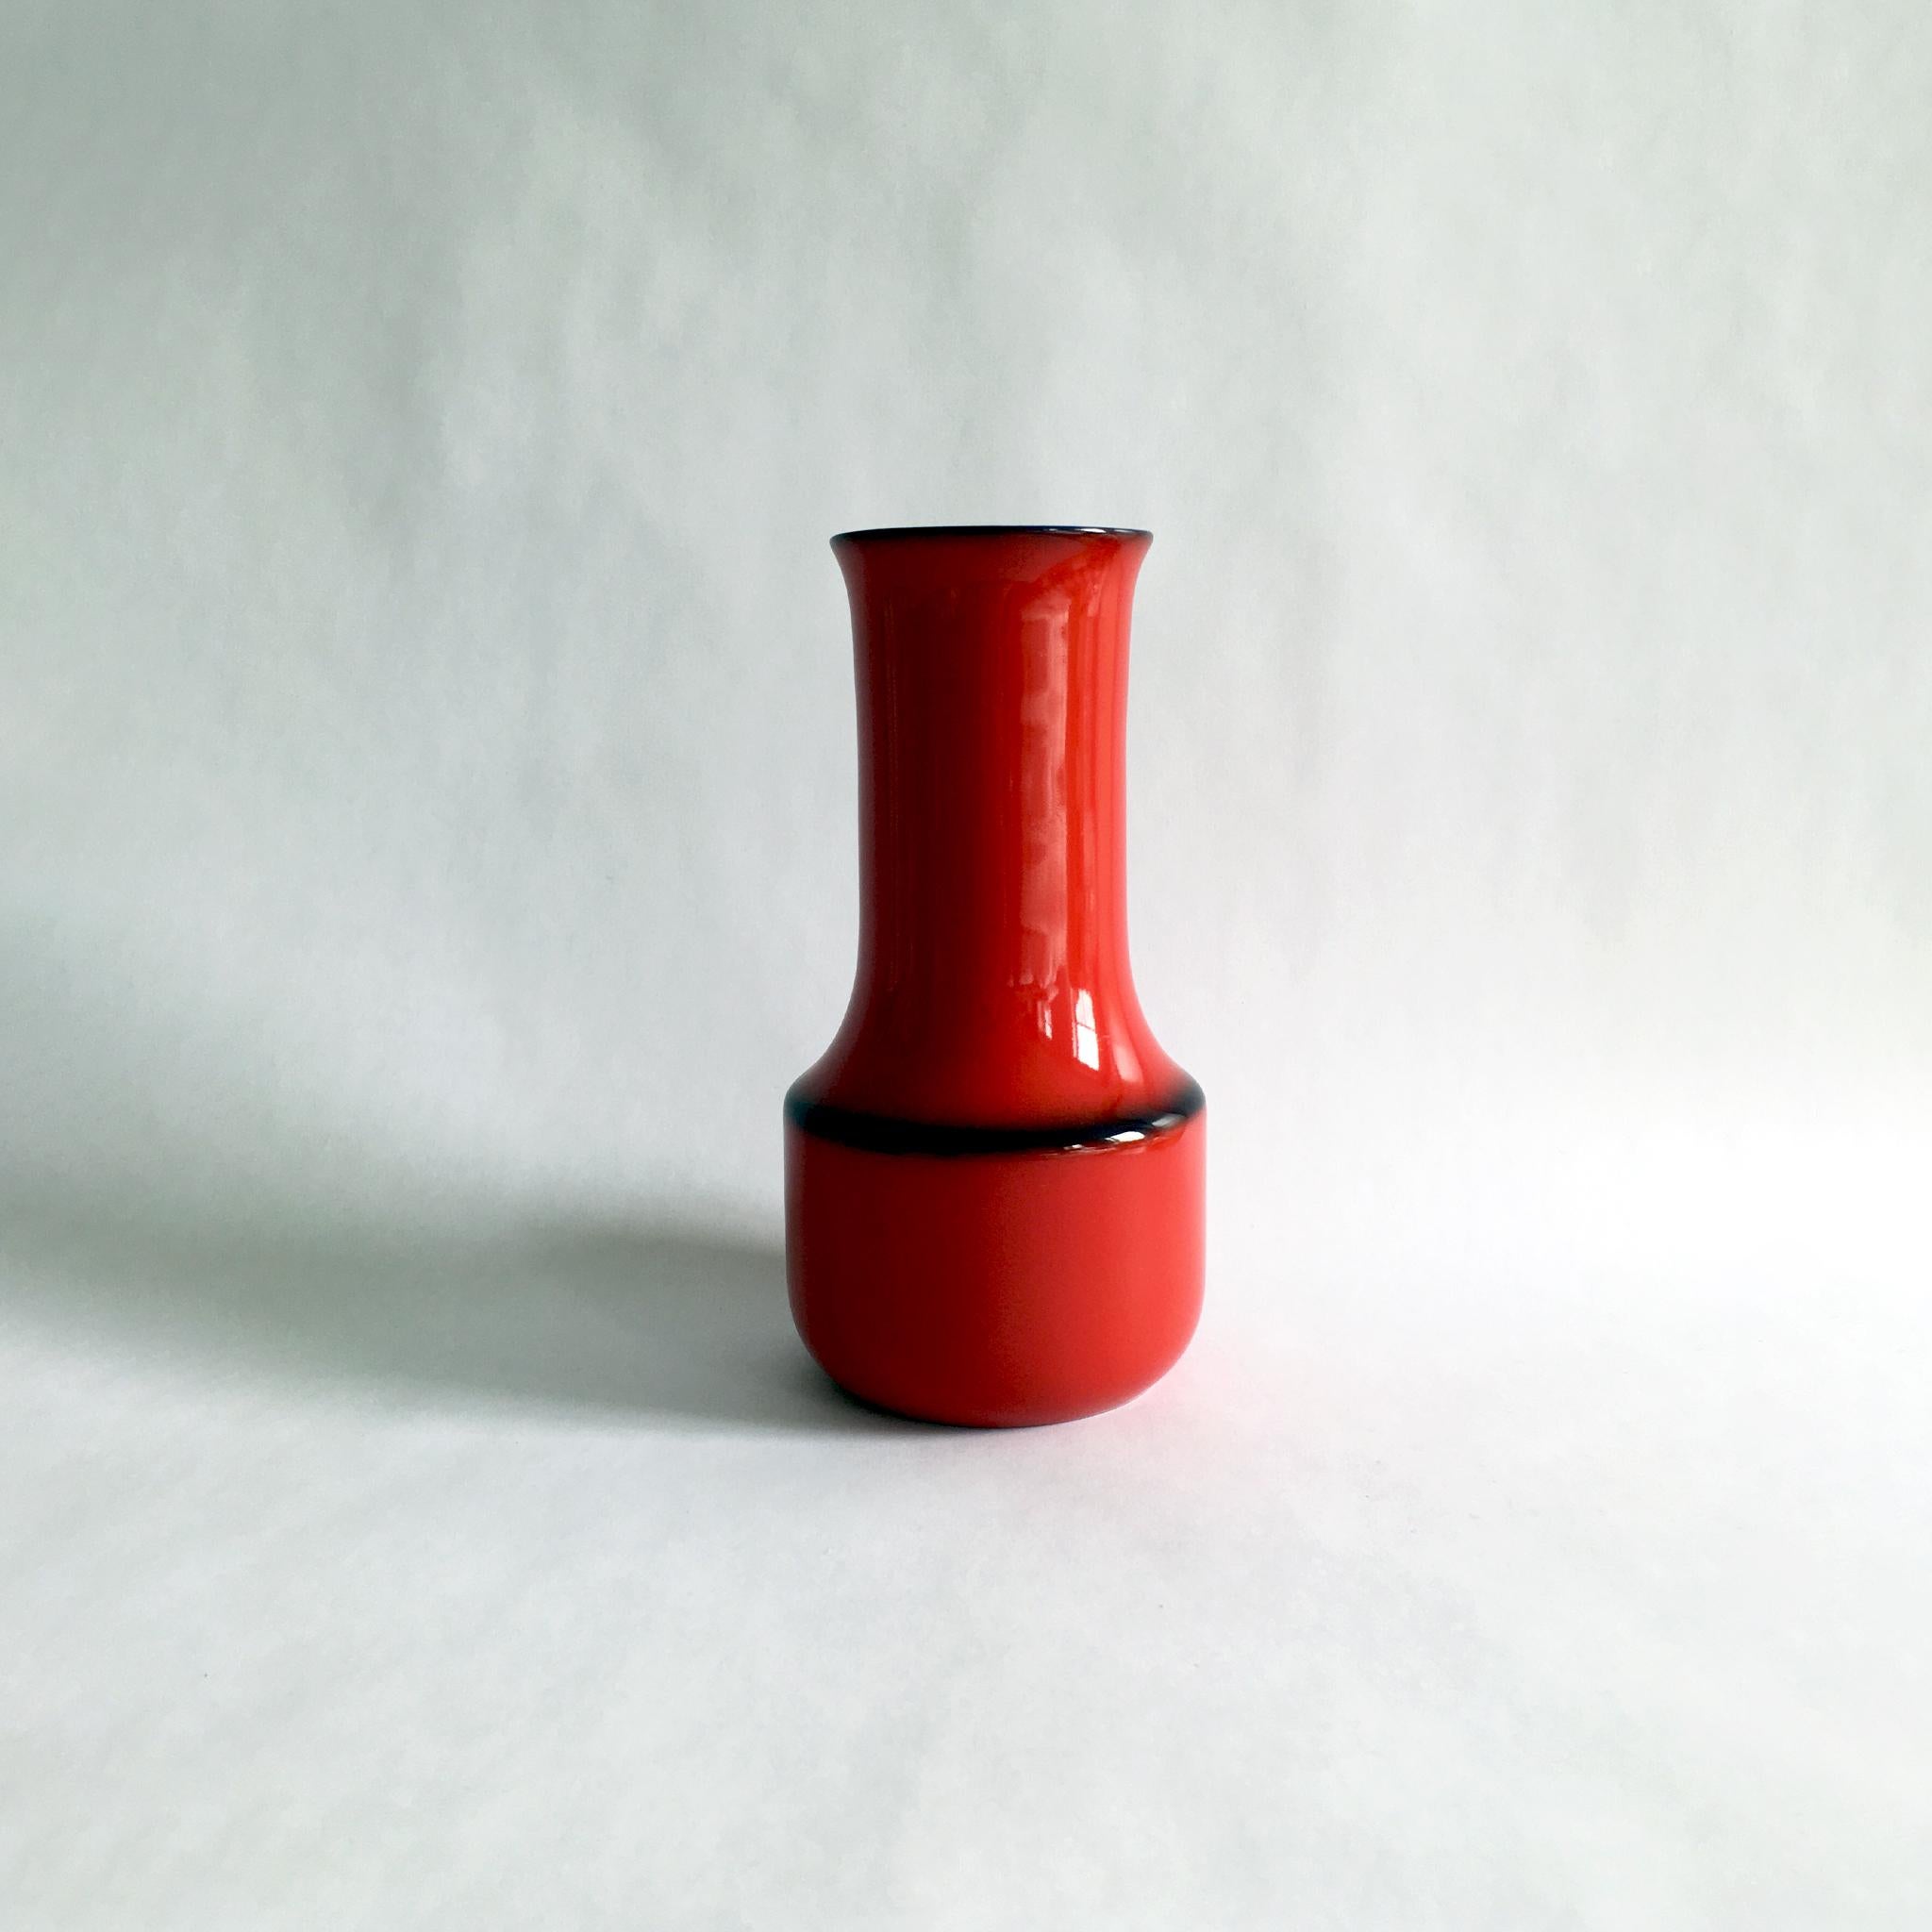 Beautiful cherry red midcentury Schonwald porcelain vase, style 112.

Measures: H 6.3